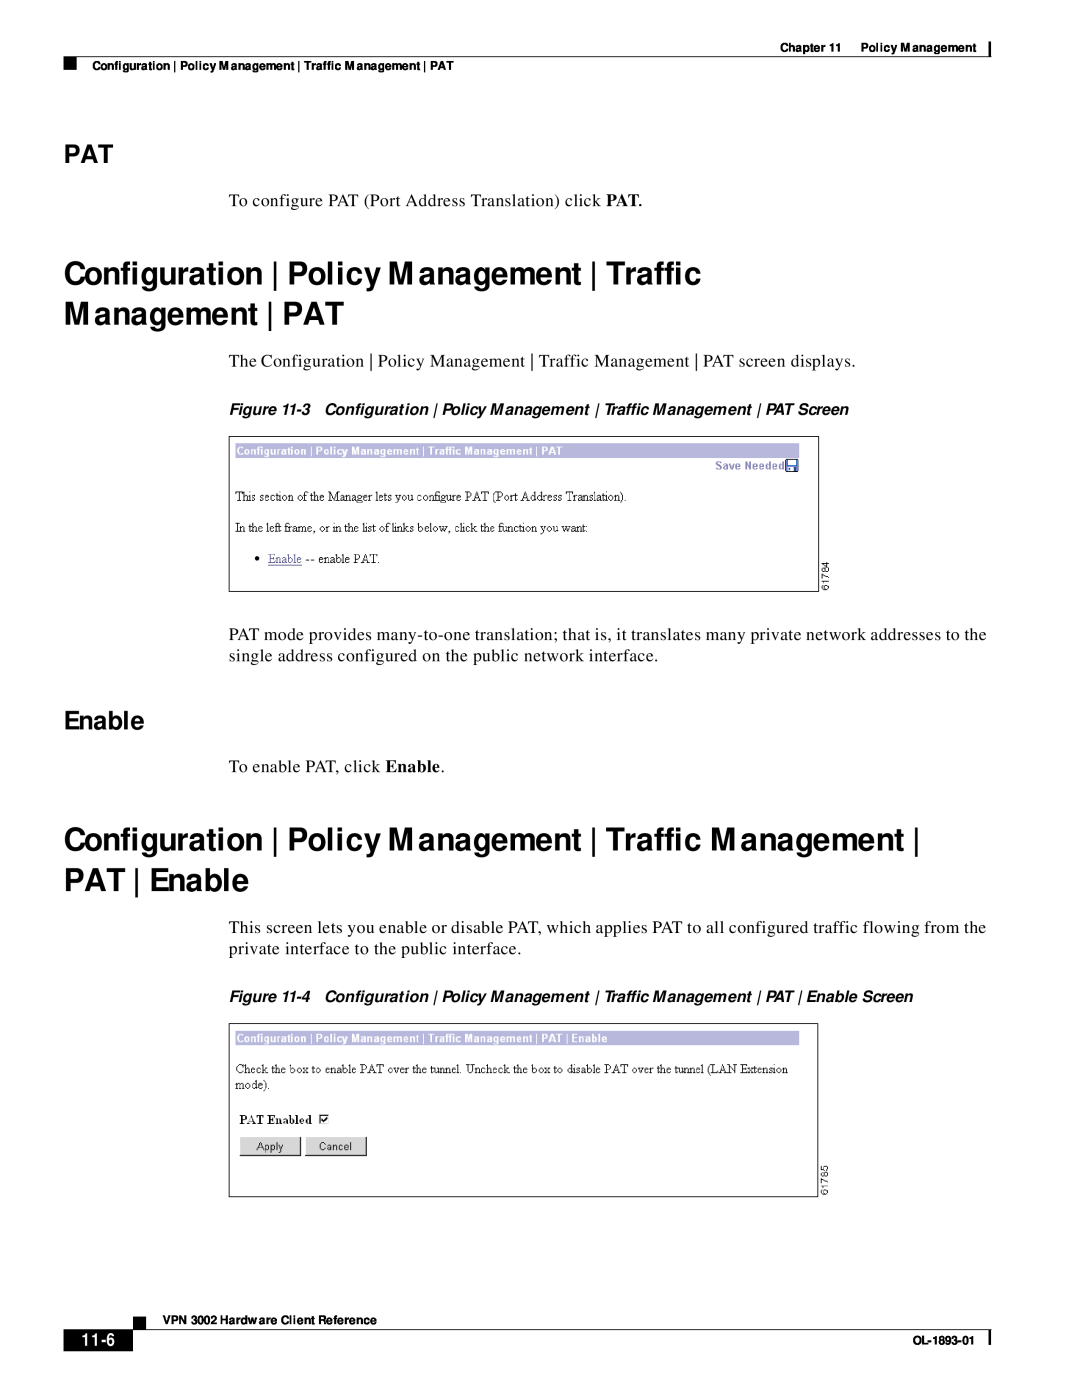 Cisco Systems VPN 3002 manual Configuration Policy Management Traffic, Management | PAT, 11-6, Enable 